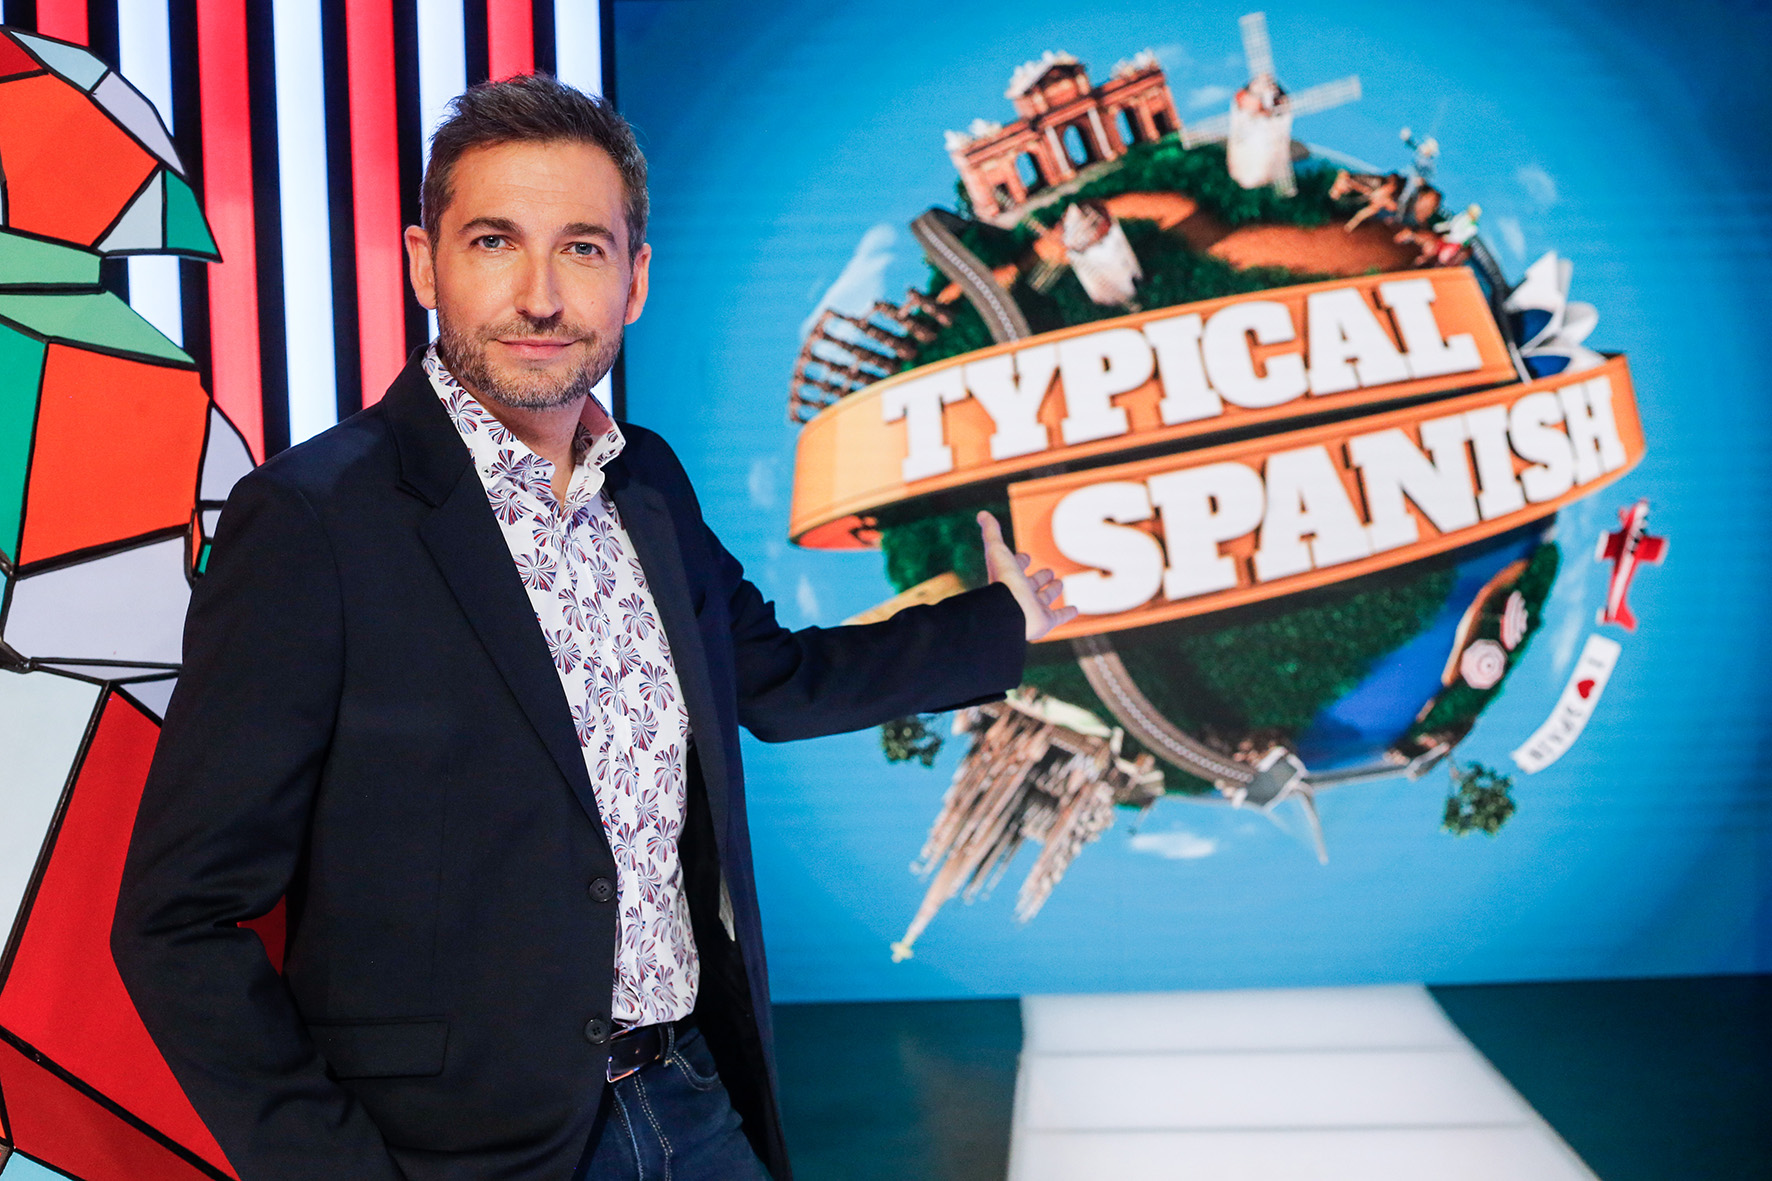 ‘Typical Spanish’: the show that will measure how much we know about Spain